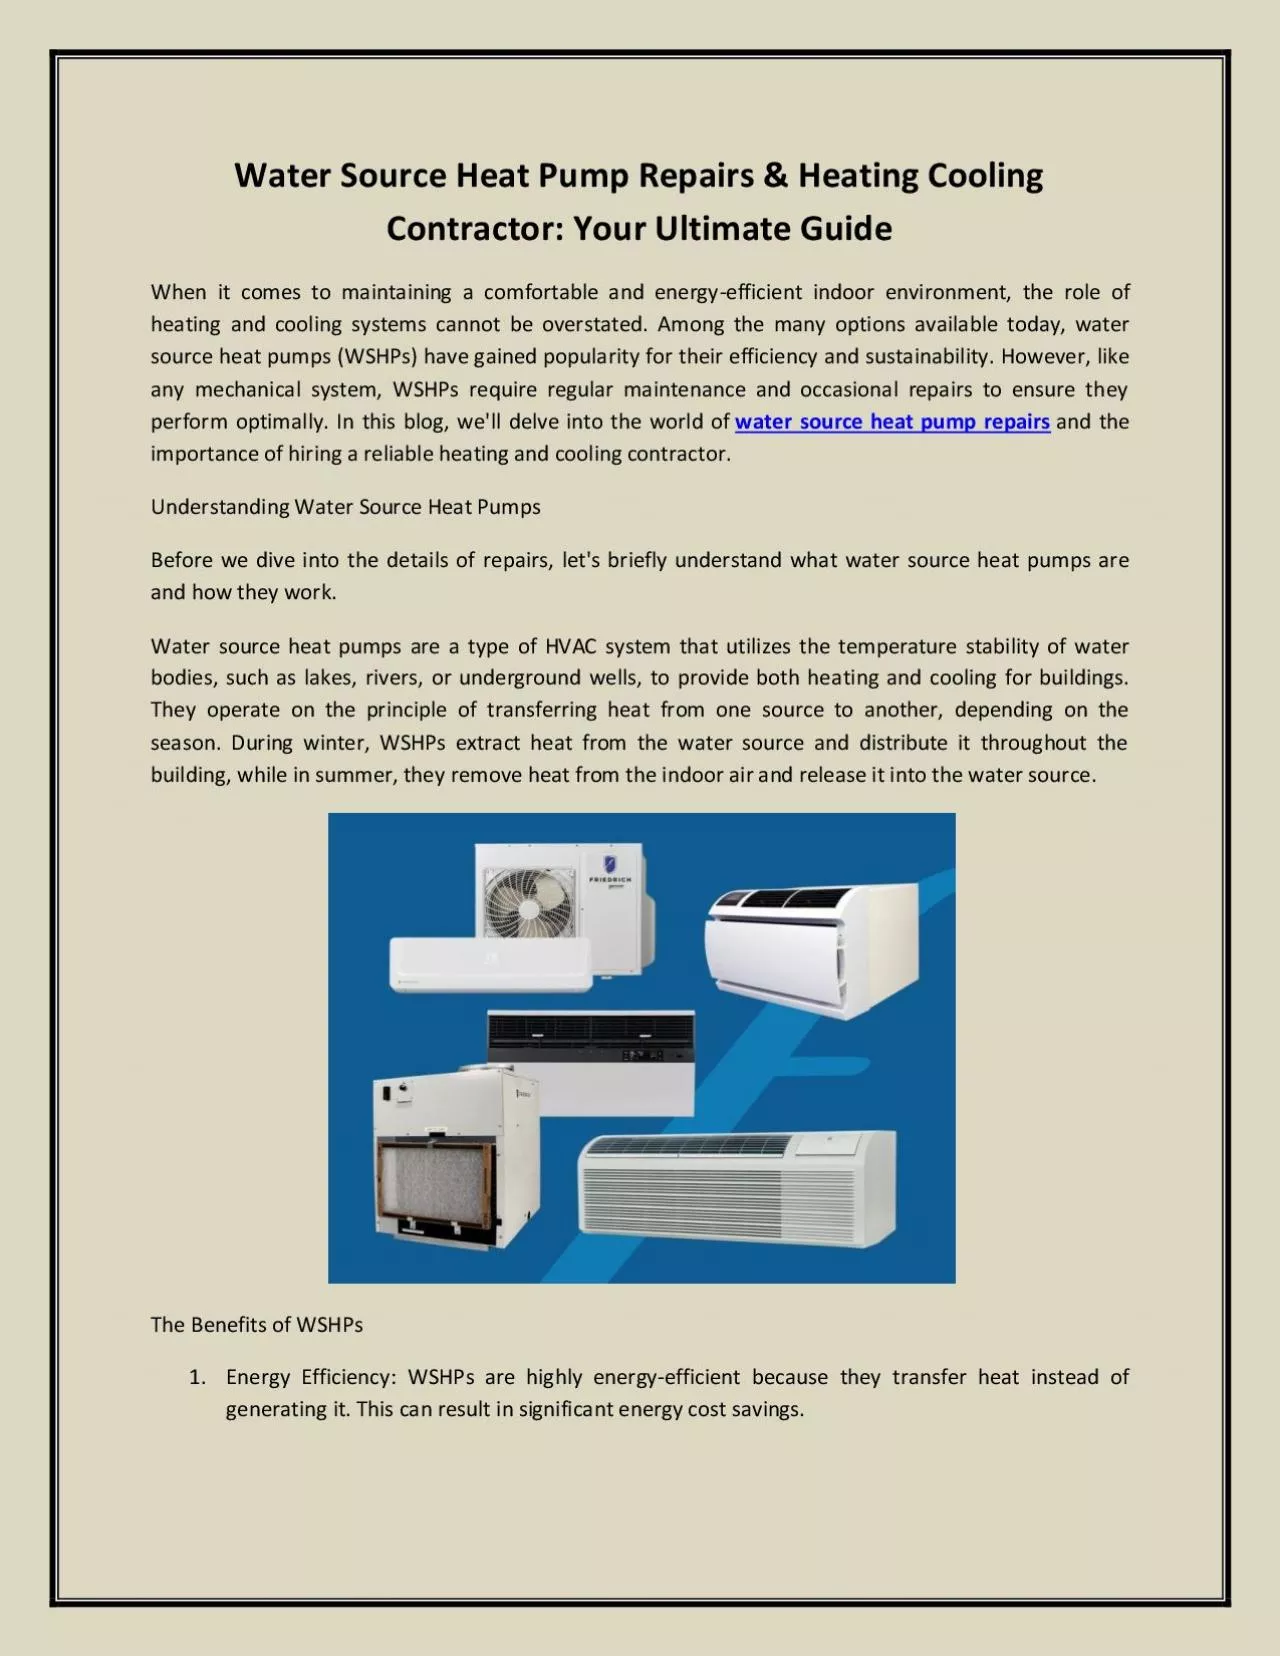 Water Source Heat Pump Repairs & Heating Cooling Contractor: Your Ultimate Guide